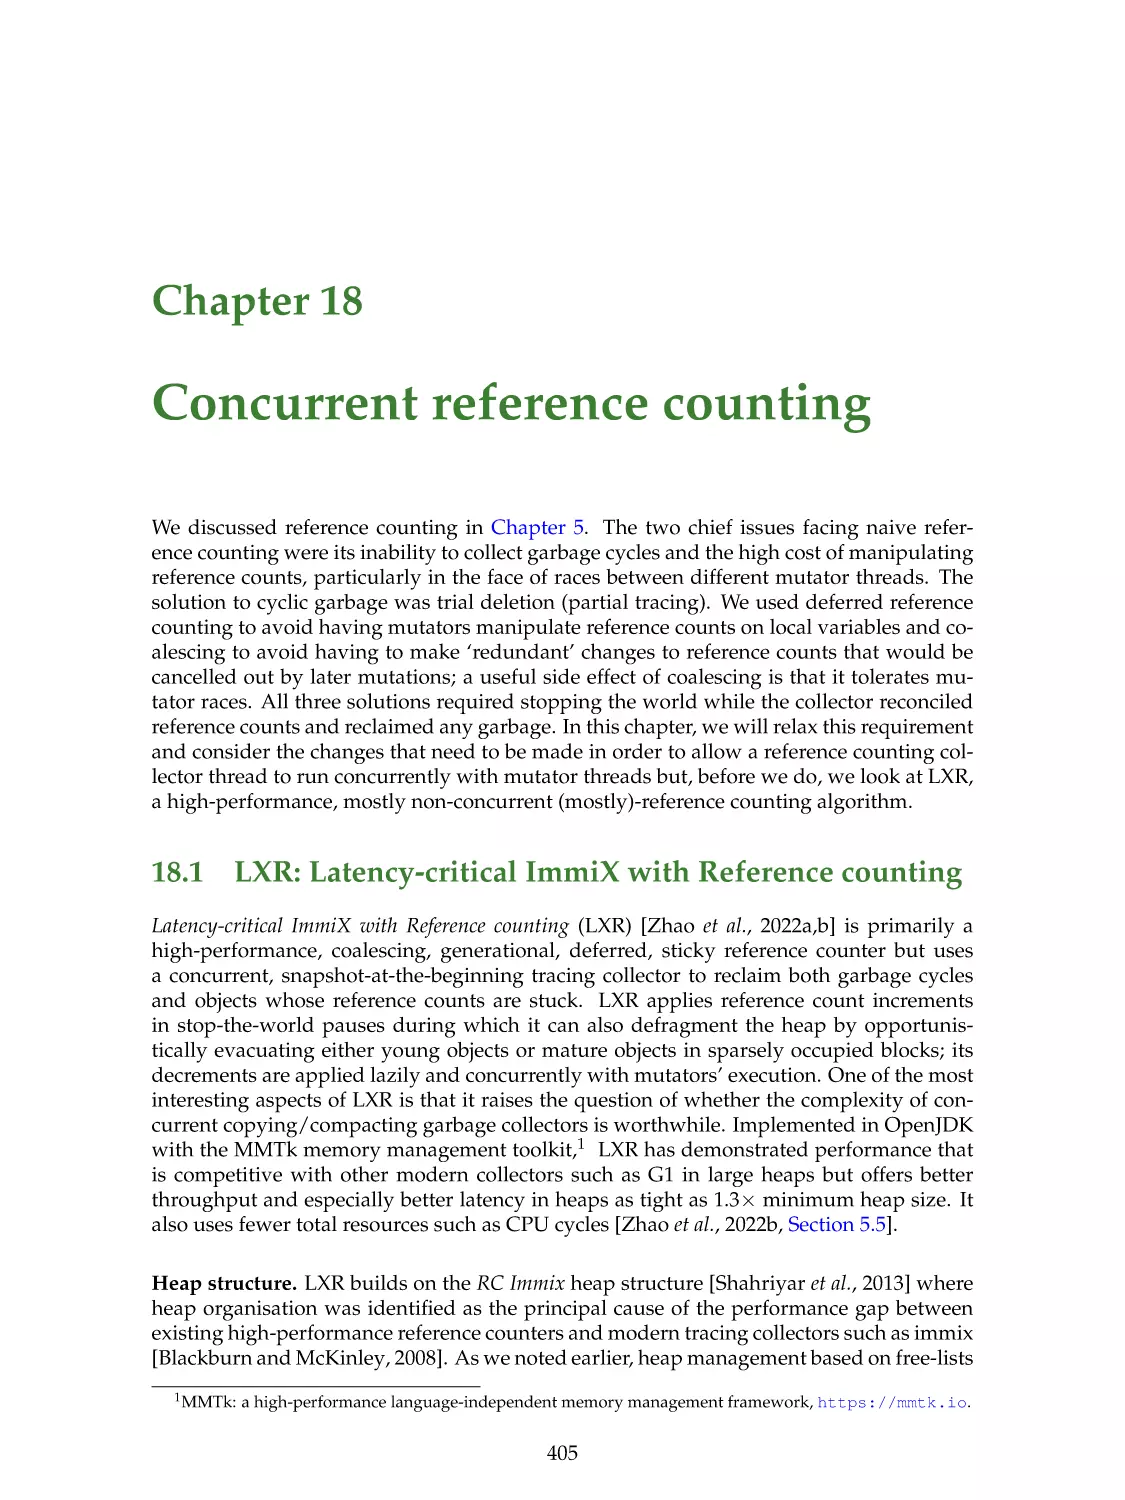 18. Concurrent reference counting
18.1. LXR